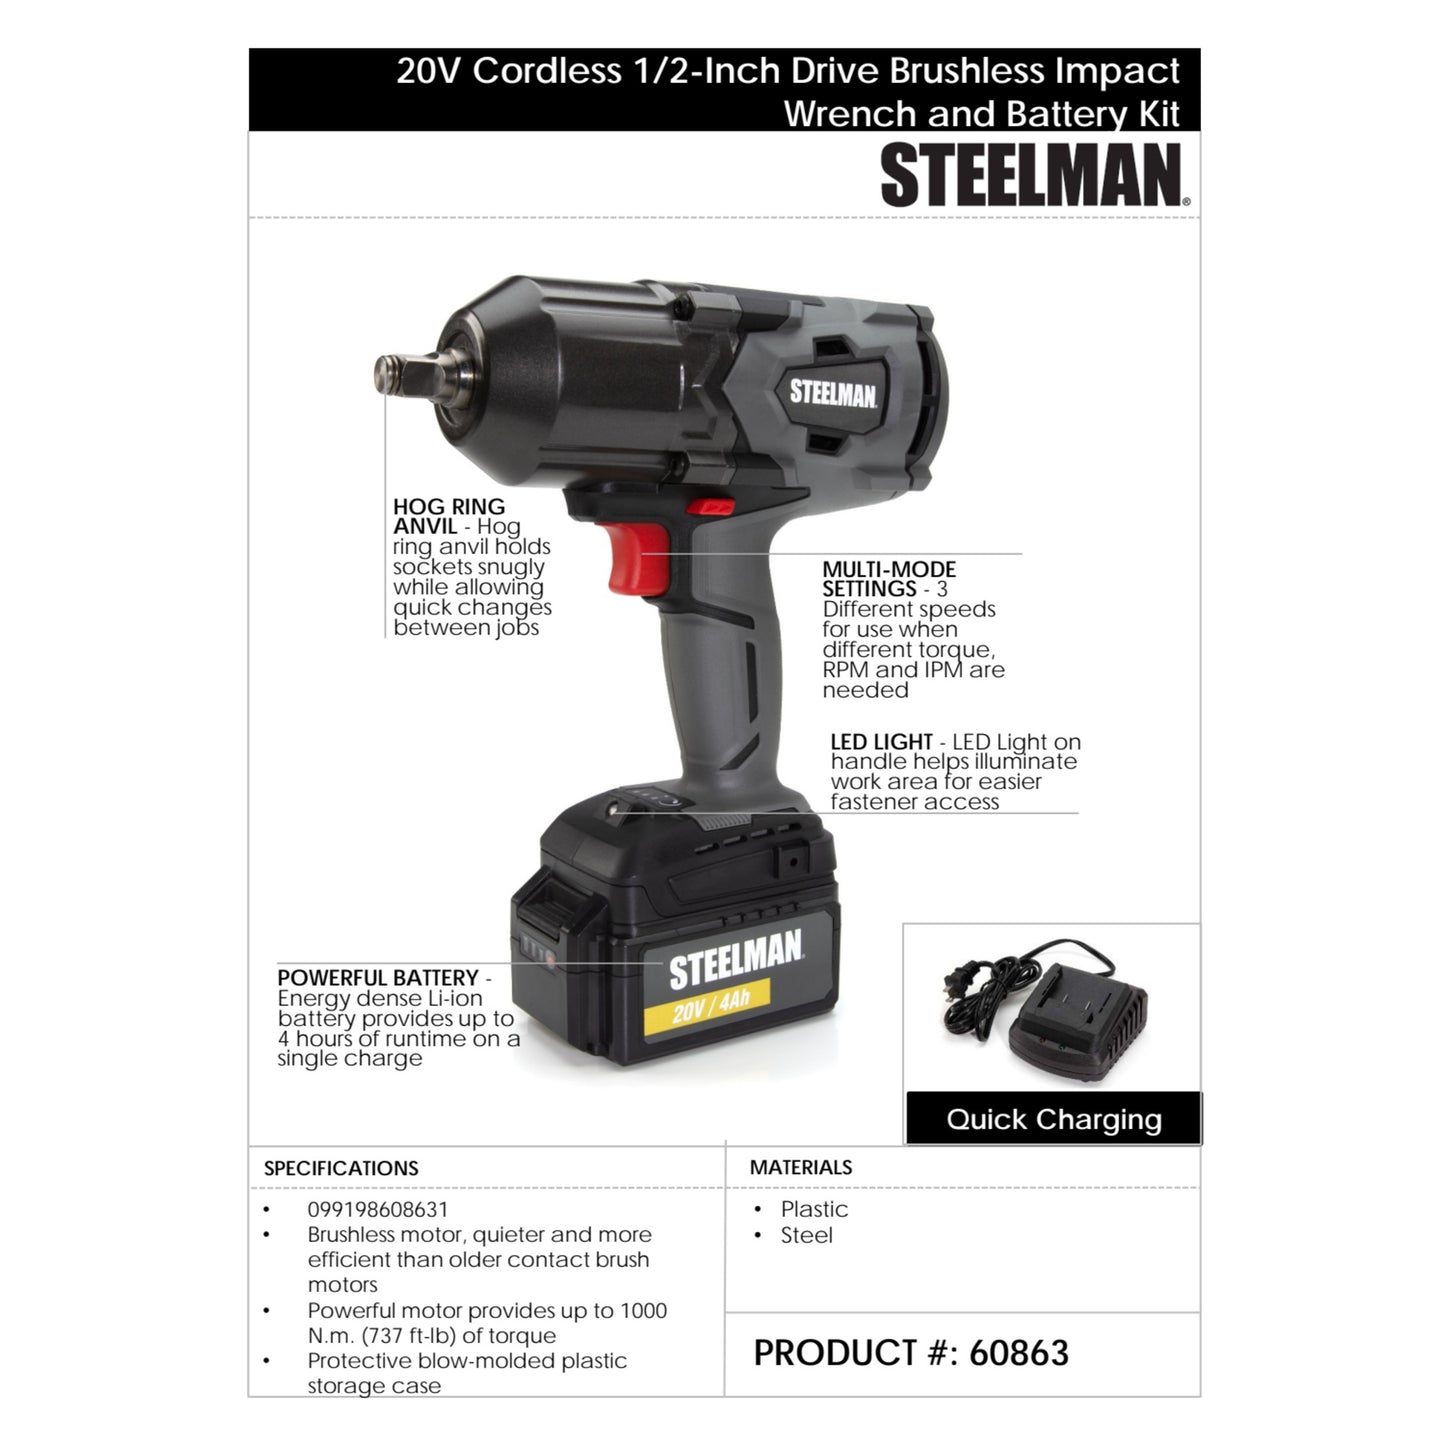 20V Cordless 1/2-Inch Drive Brushless Impact Wrench and Battery Kit